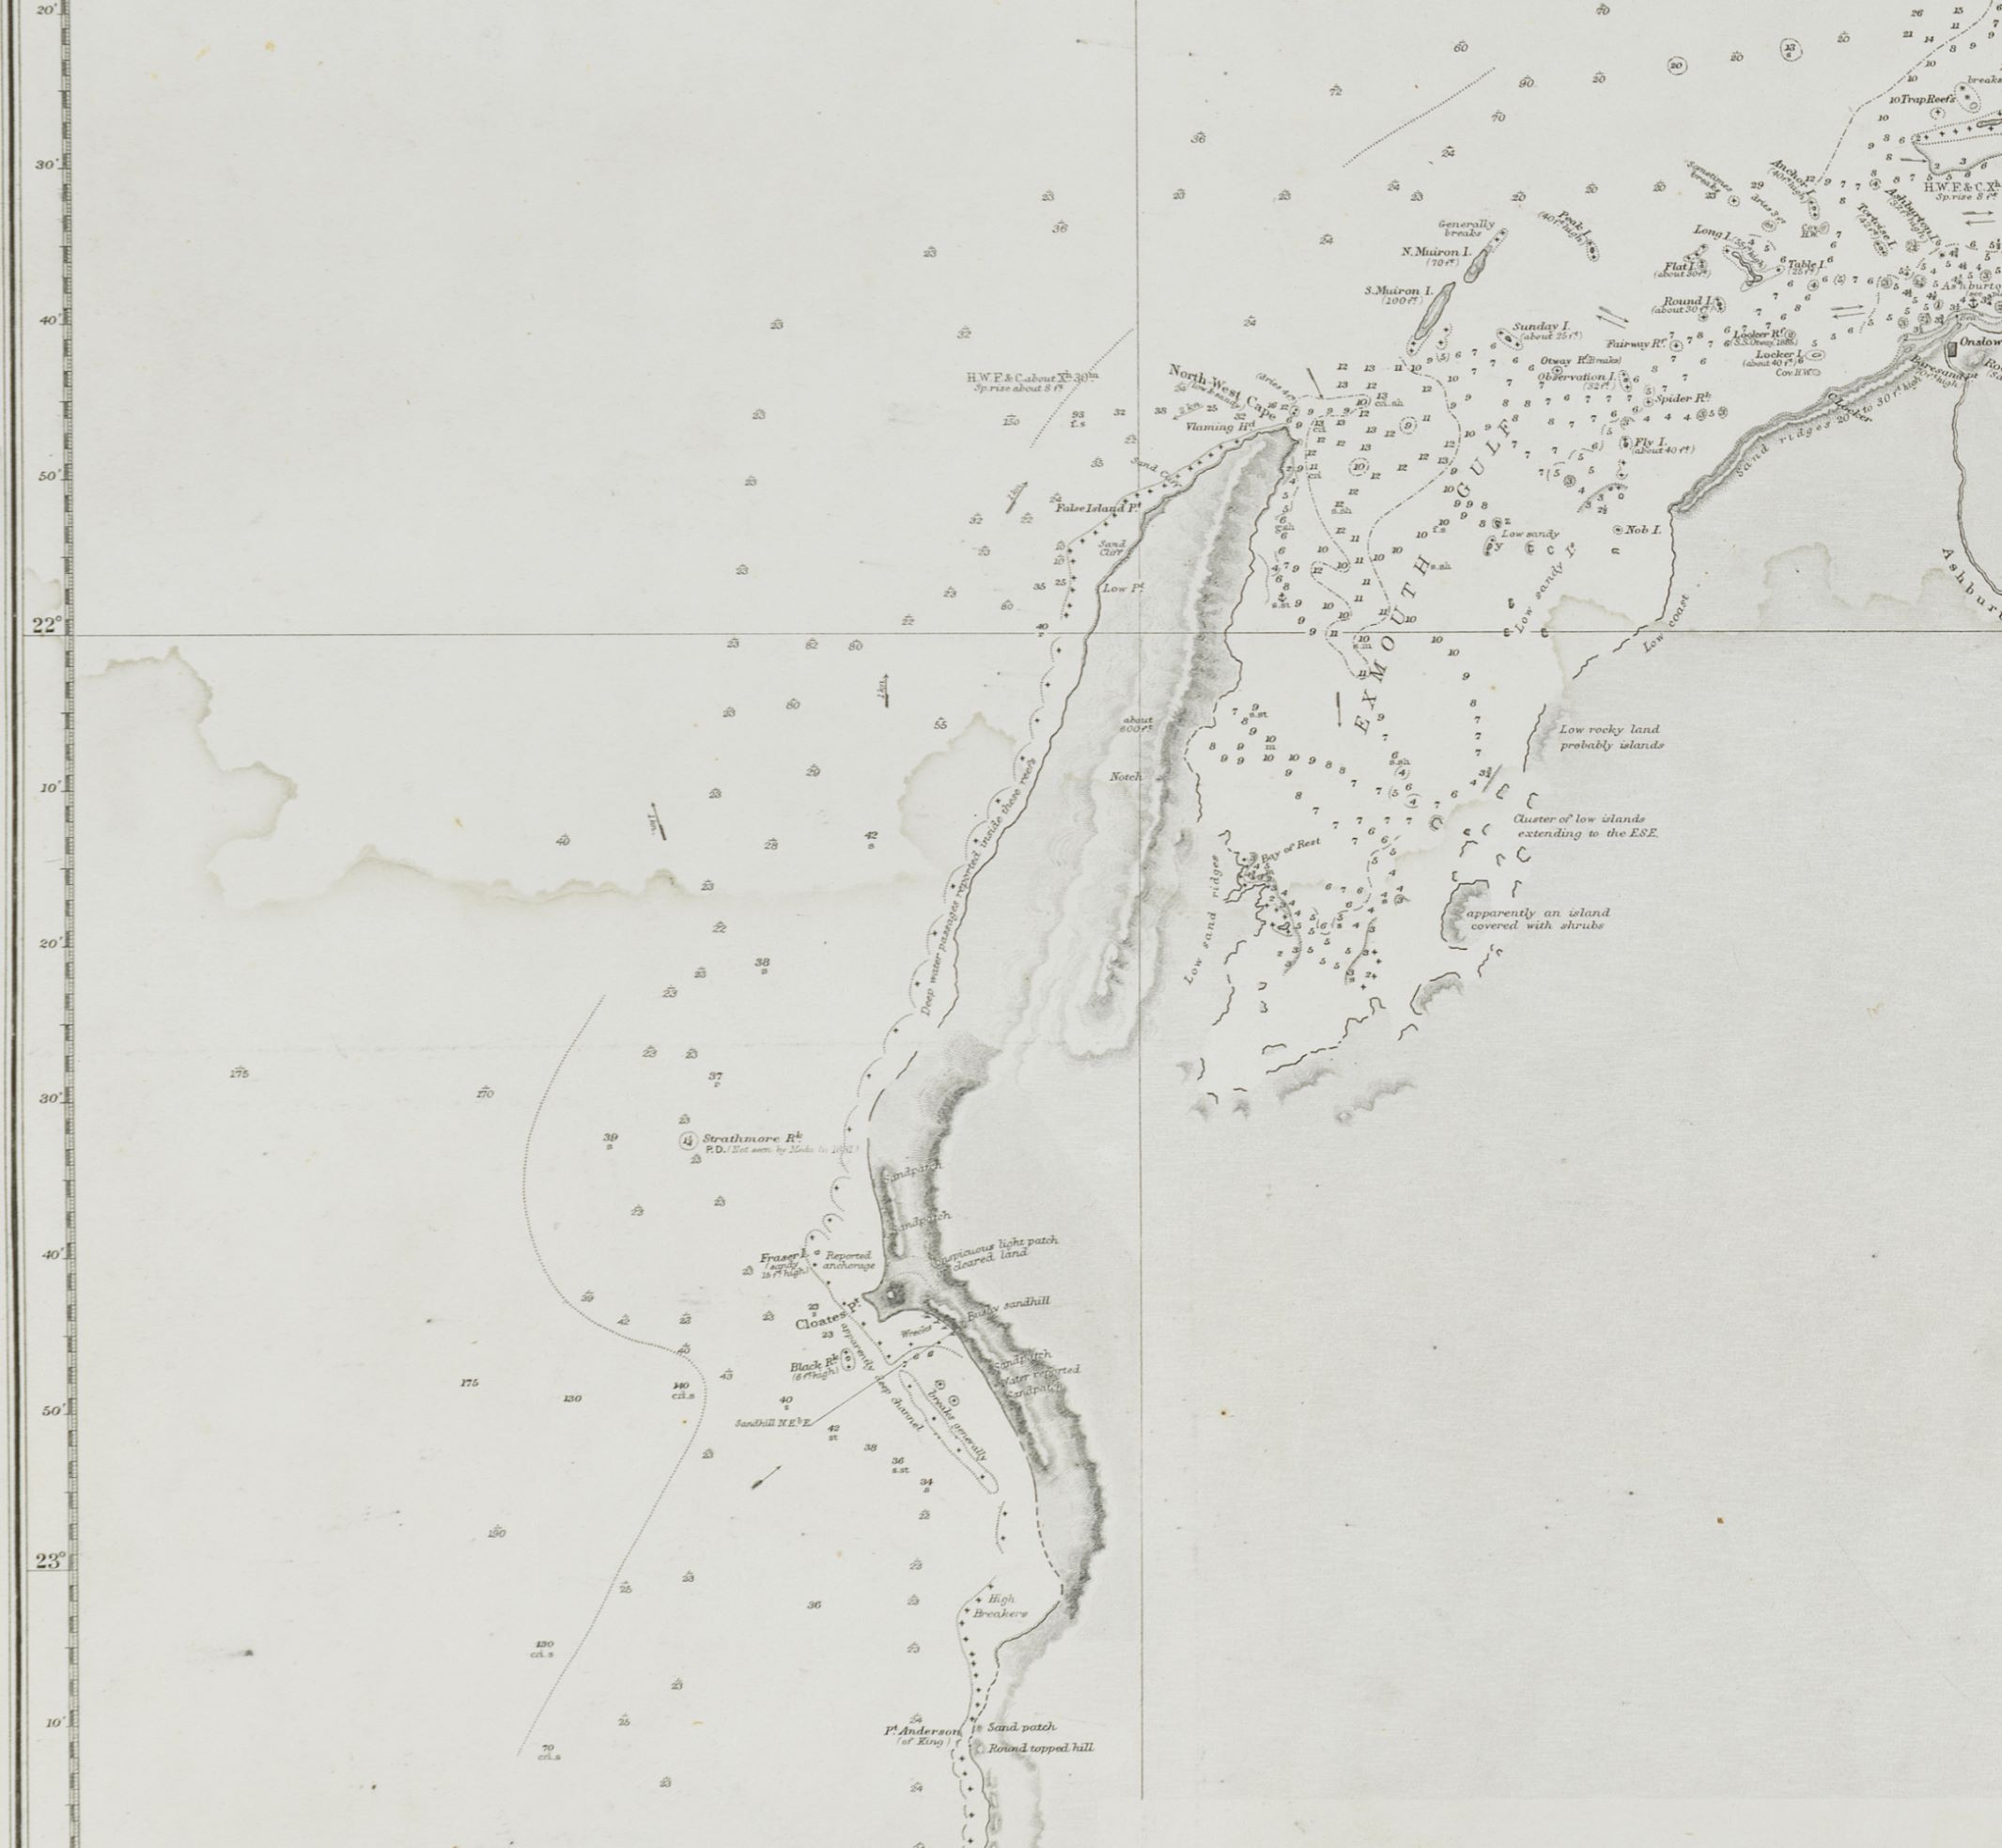 Handdrawn map, Point Cloates sticks out from the coast.